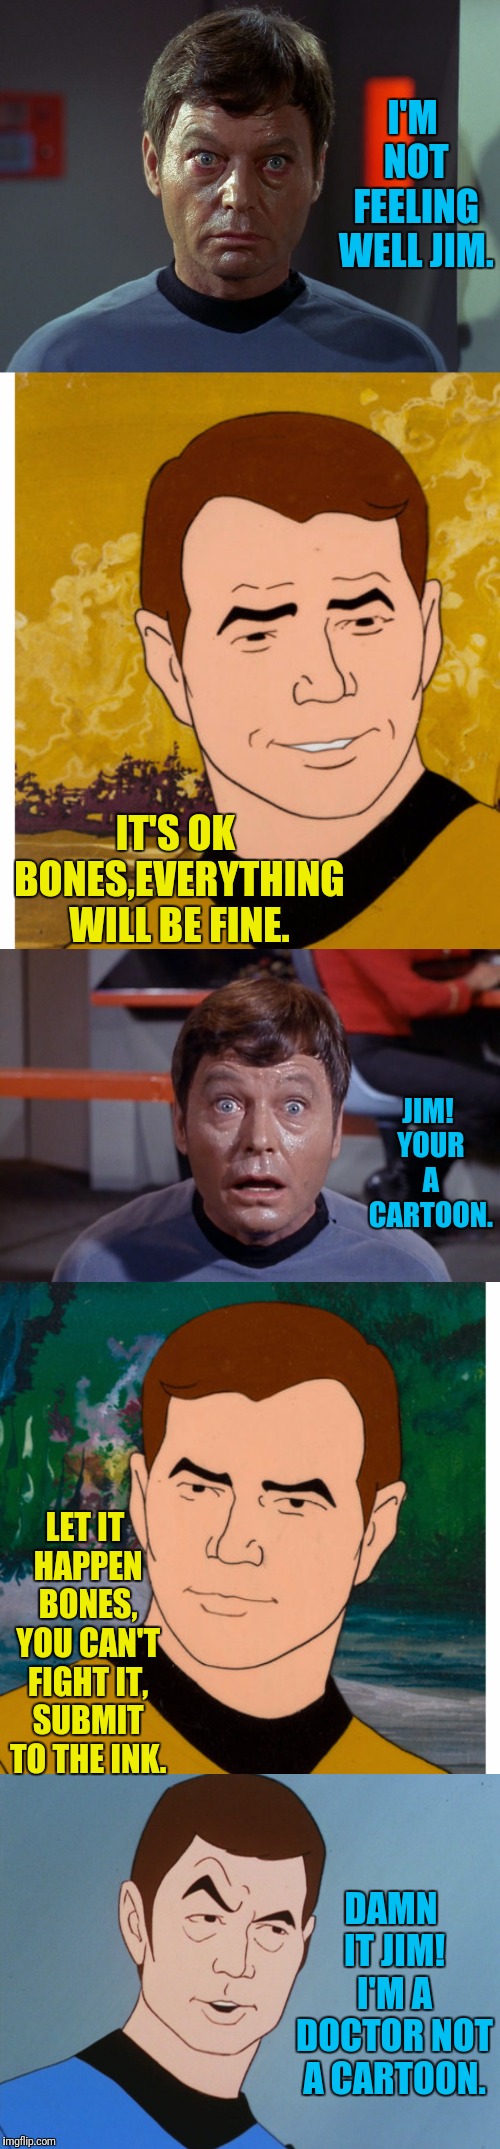 Rattled Bones | I'M NOT FEELING WELL JIM. IT'S OK BONES,EVERYTHING WILL BE FINE. JIM! YOUR A CARTOON. LET IT HAPPEN BONES, YOU CAN'T FIGHT IT, SUBMIT TO THE INK. DAMN IT JIM! I'M A DOCTOR NOT A CARTOON. | image tagged in star trek,bones mccoy,bones,captain kirk,kirk,comics/cartoons | made w/ Imgflip meme maker